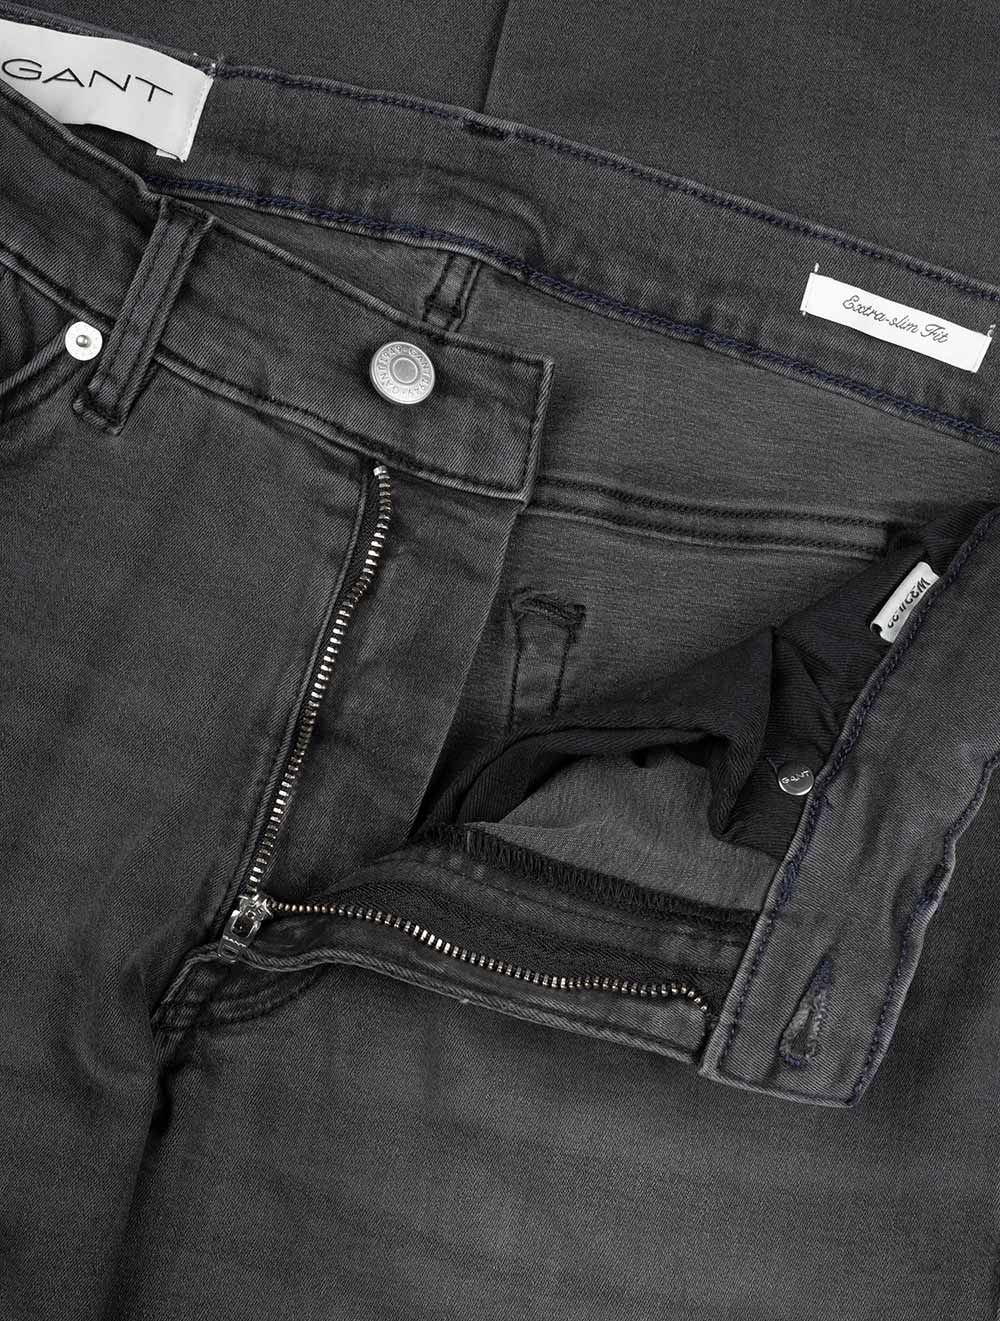 Extra Slim Active Recover Jeans Black Worn In